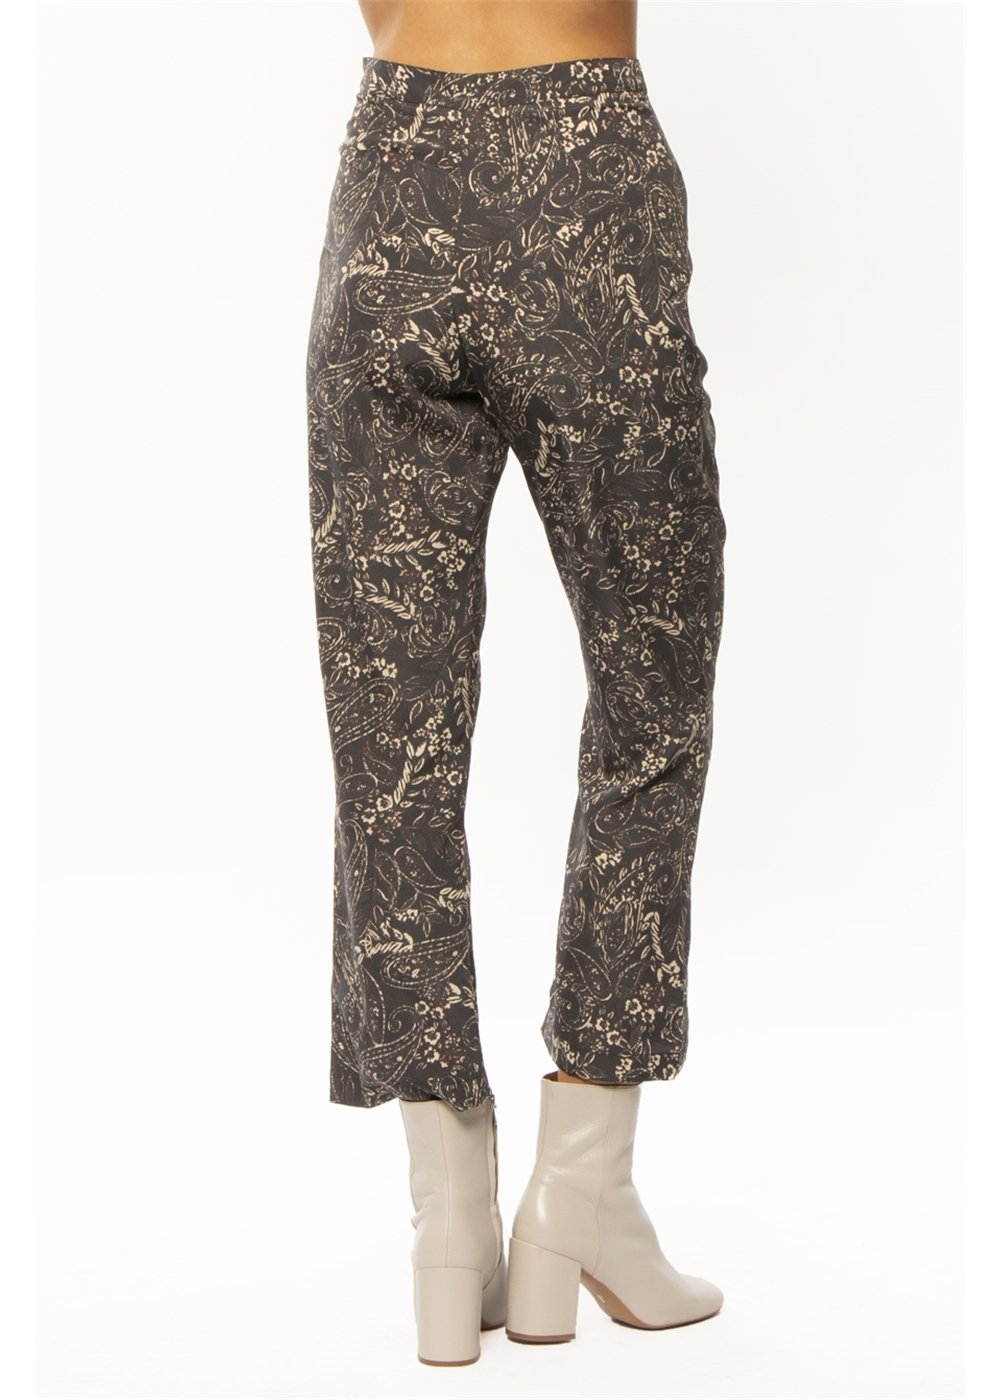 STATE OF MIND WVN PANT